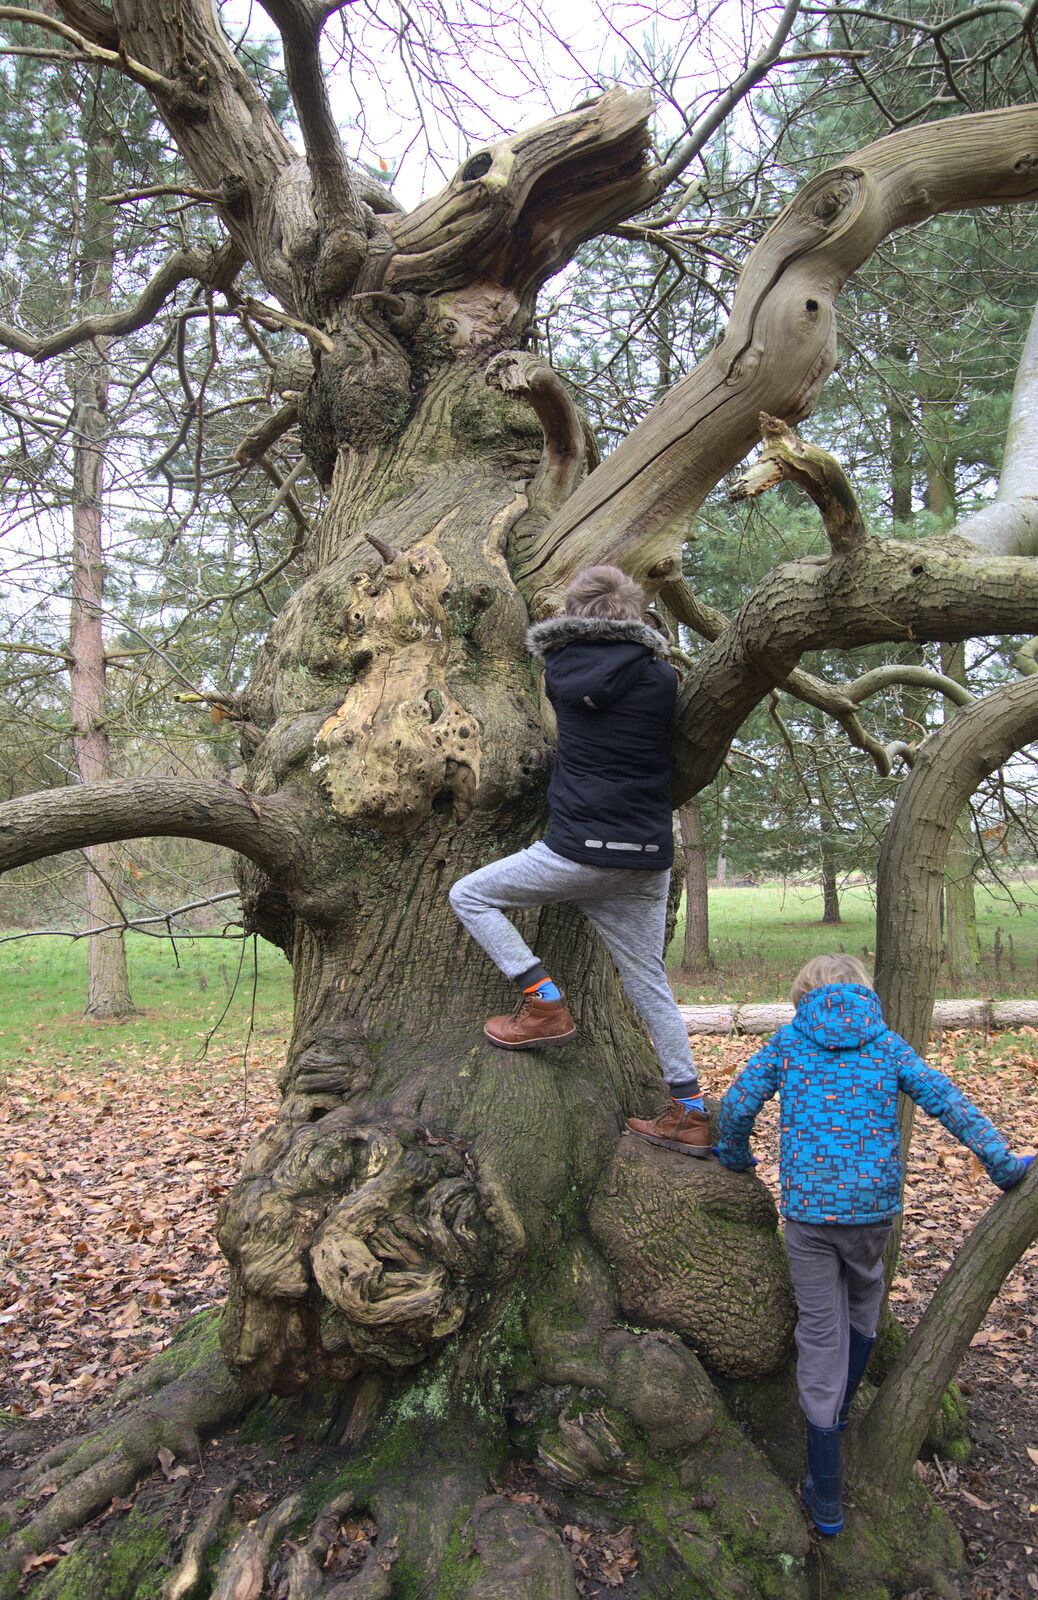 The boys climb the incredibly gnarly tree from Ickworth House, Horringer, Suffolk - 29th December 2018